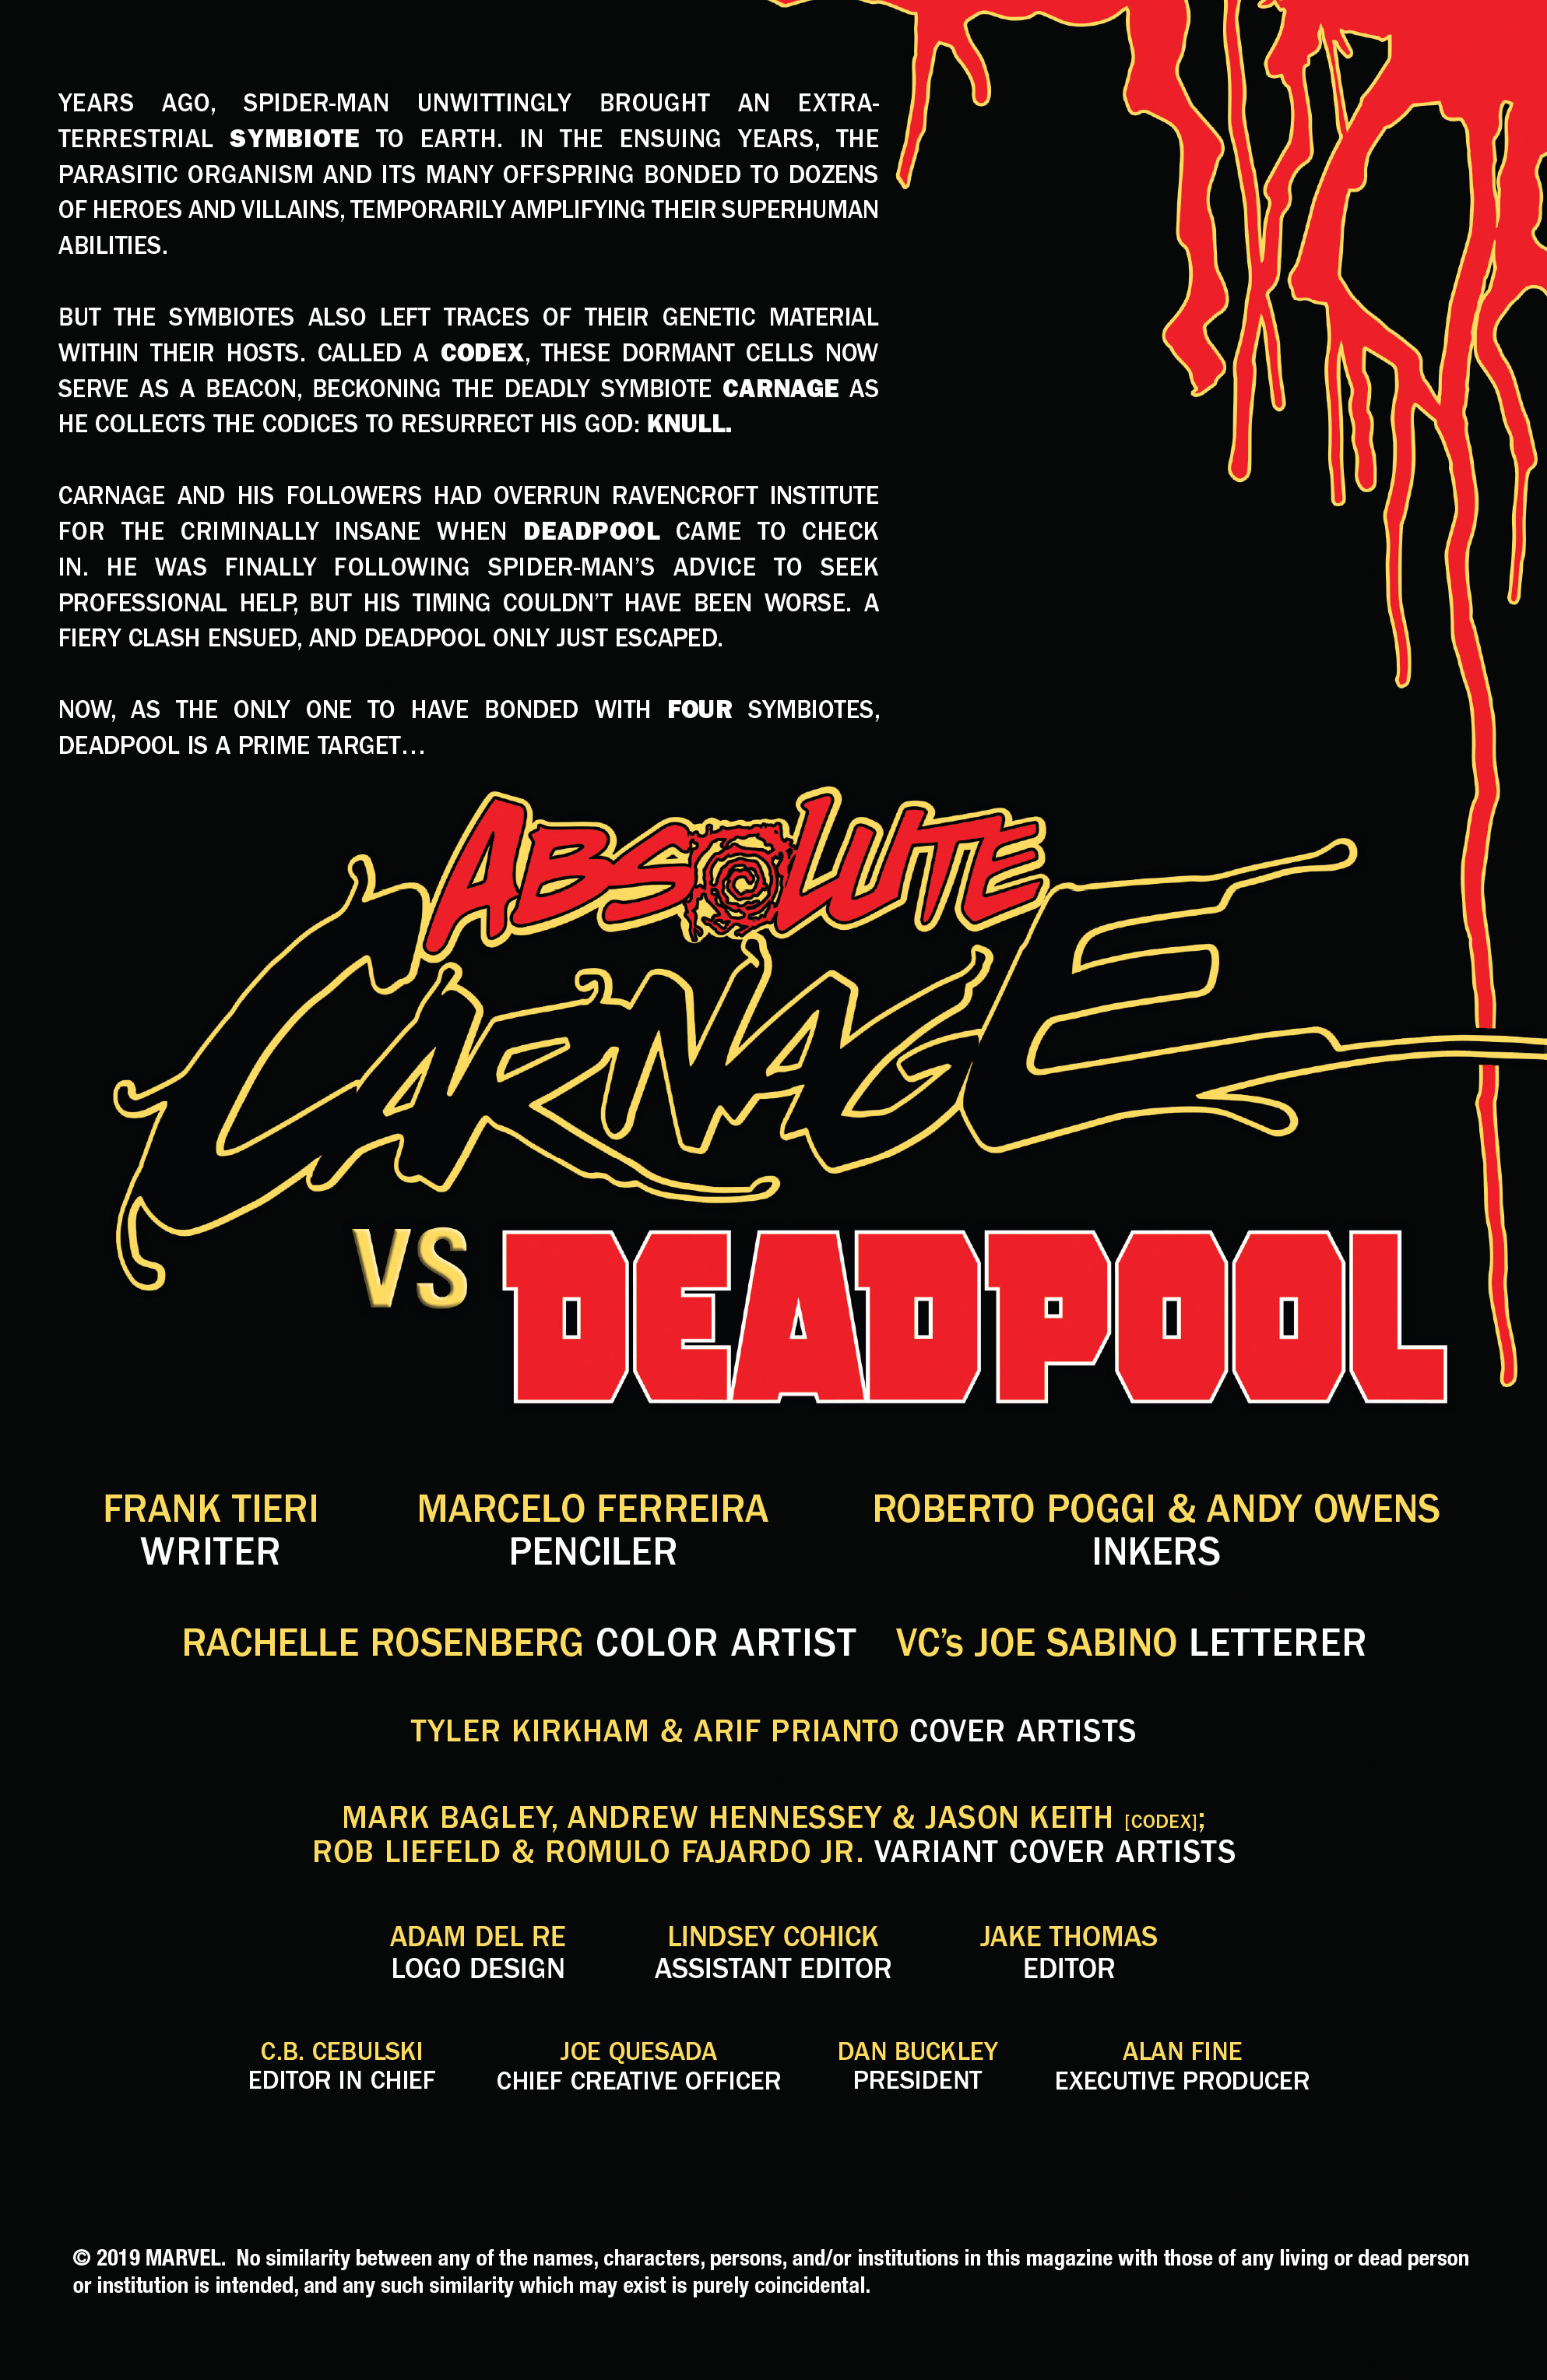 Read online Absolute Carnage vs. Deadpool comic -  Issue #2 - 2